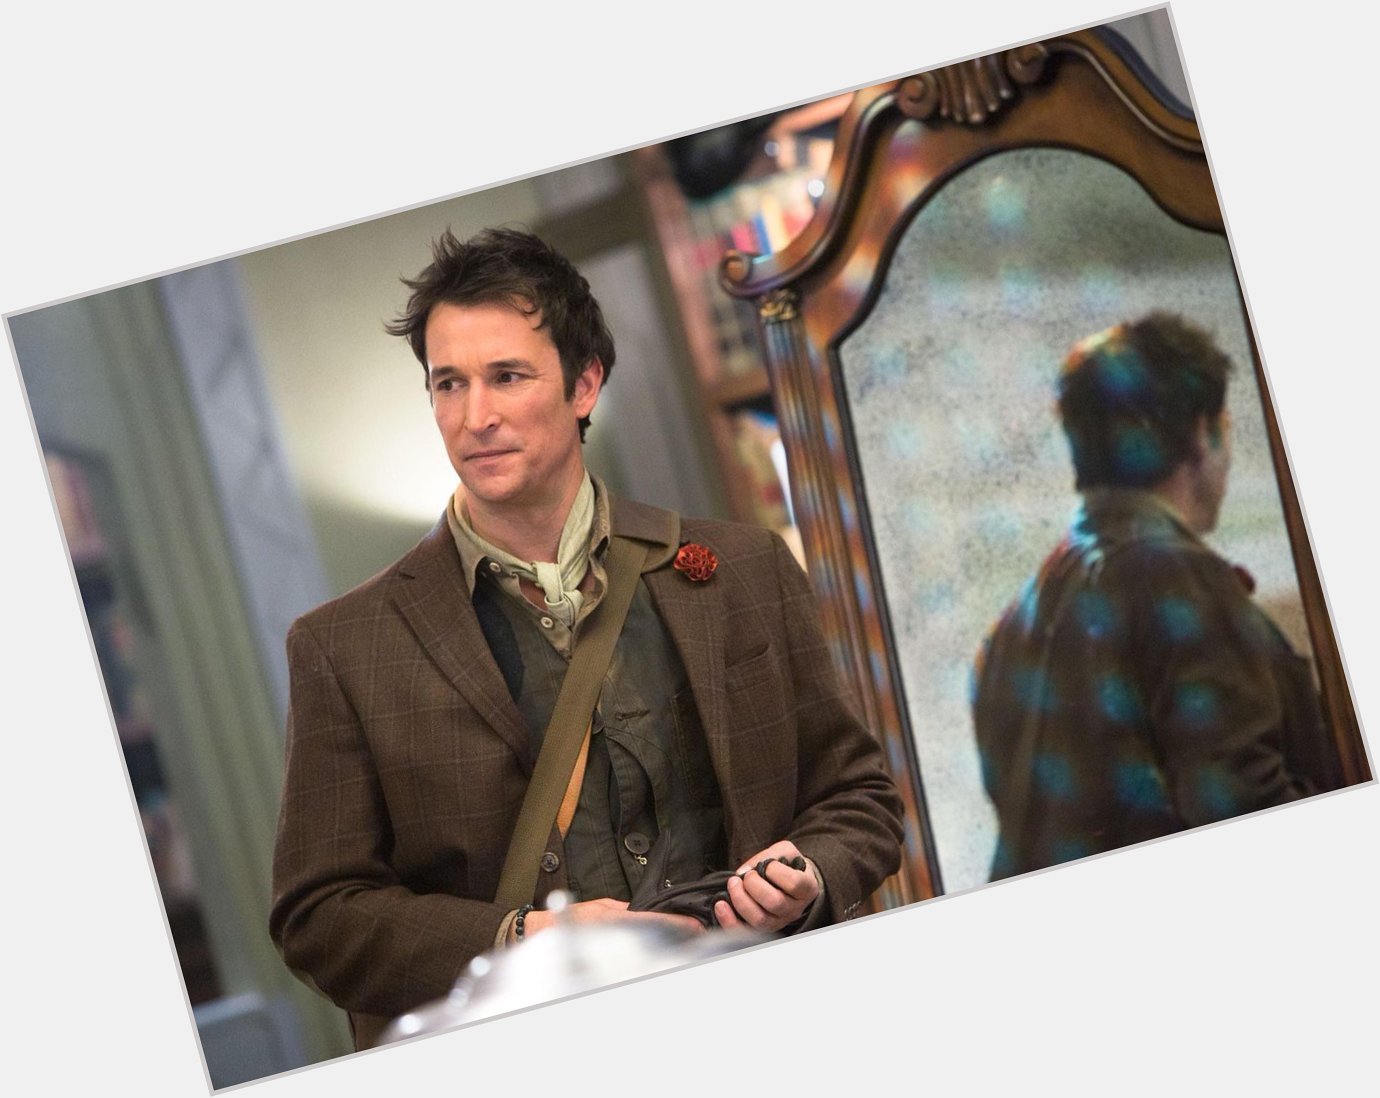 Please help us wish this original Librarian a VERY Happy Birthday today.  We love you Noah Wyle!  